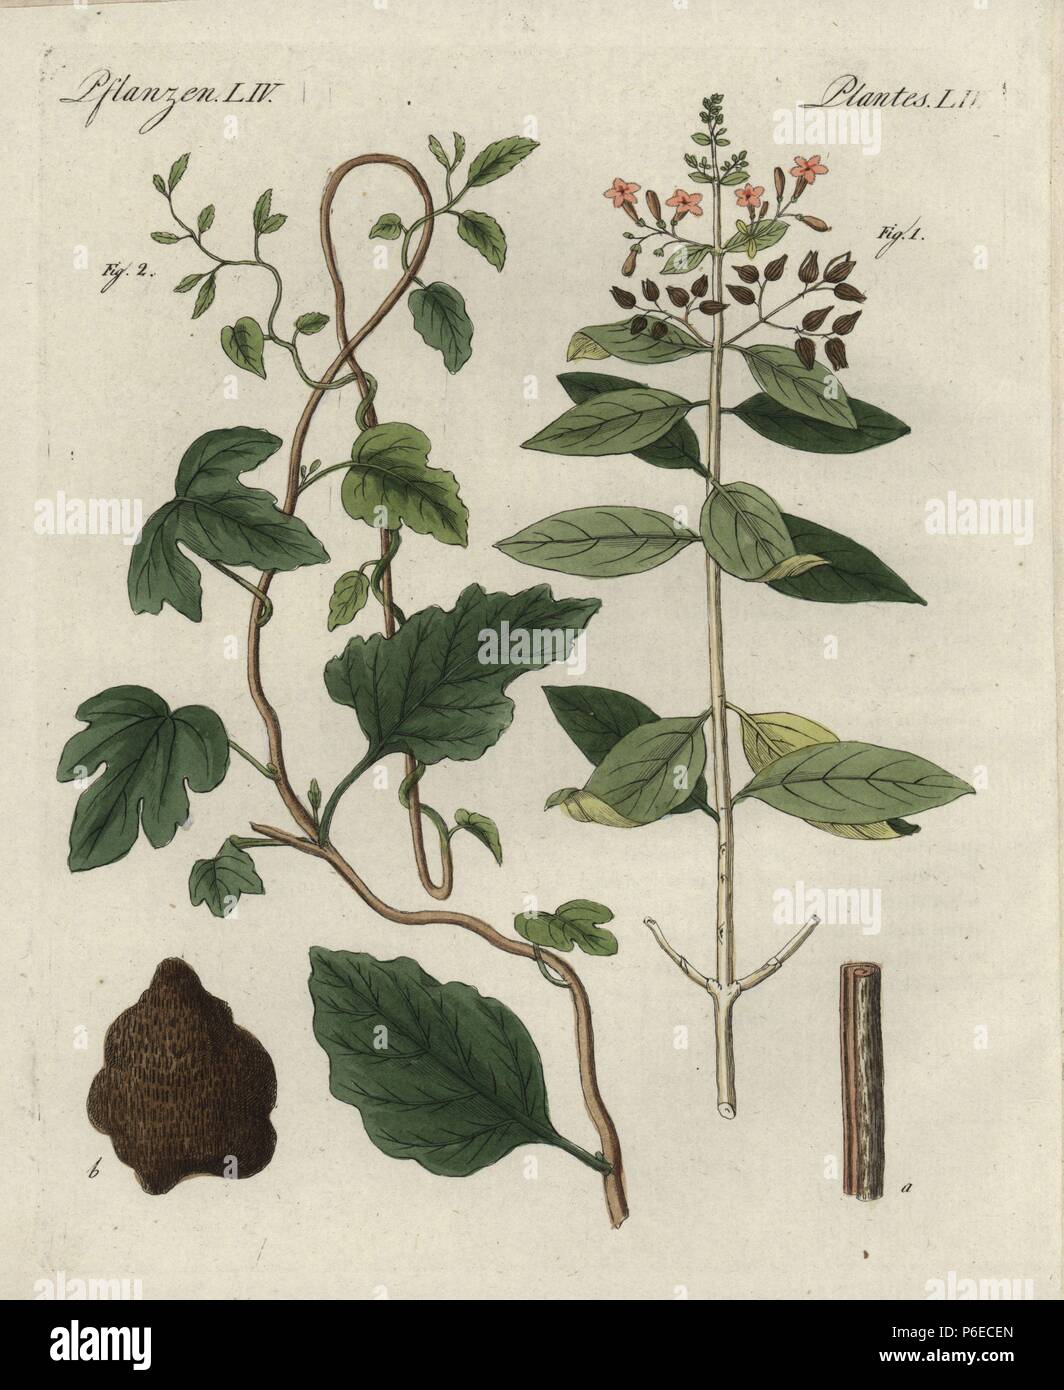 Quinine bark tree, Cinchona officinalis 1, and jalap, Ipomoea purga 2, showing leaf, flower, and bark. Handcoloured copperplate engraving from Bertuch's 'Bilderbuch fur Kinder' (Picture Book for Children), Weimar, 1798. Friedrich Johann Bertuch (1747-1822) was a German publisher and man of arts most famous for his 12-volume encyclopedia for children illustrated with 1,200 engraved plates on natural history, science, costume, mythology, etc., published from 1790-1830. Stock Photo